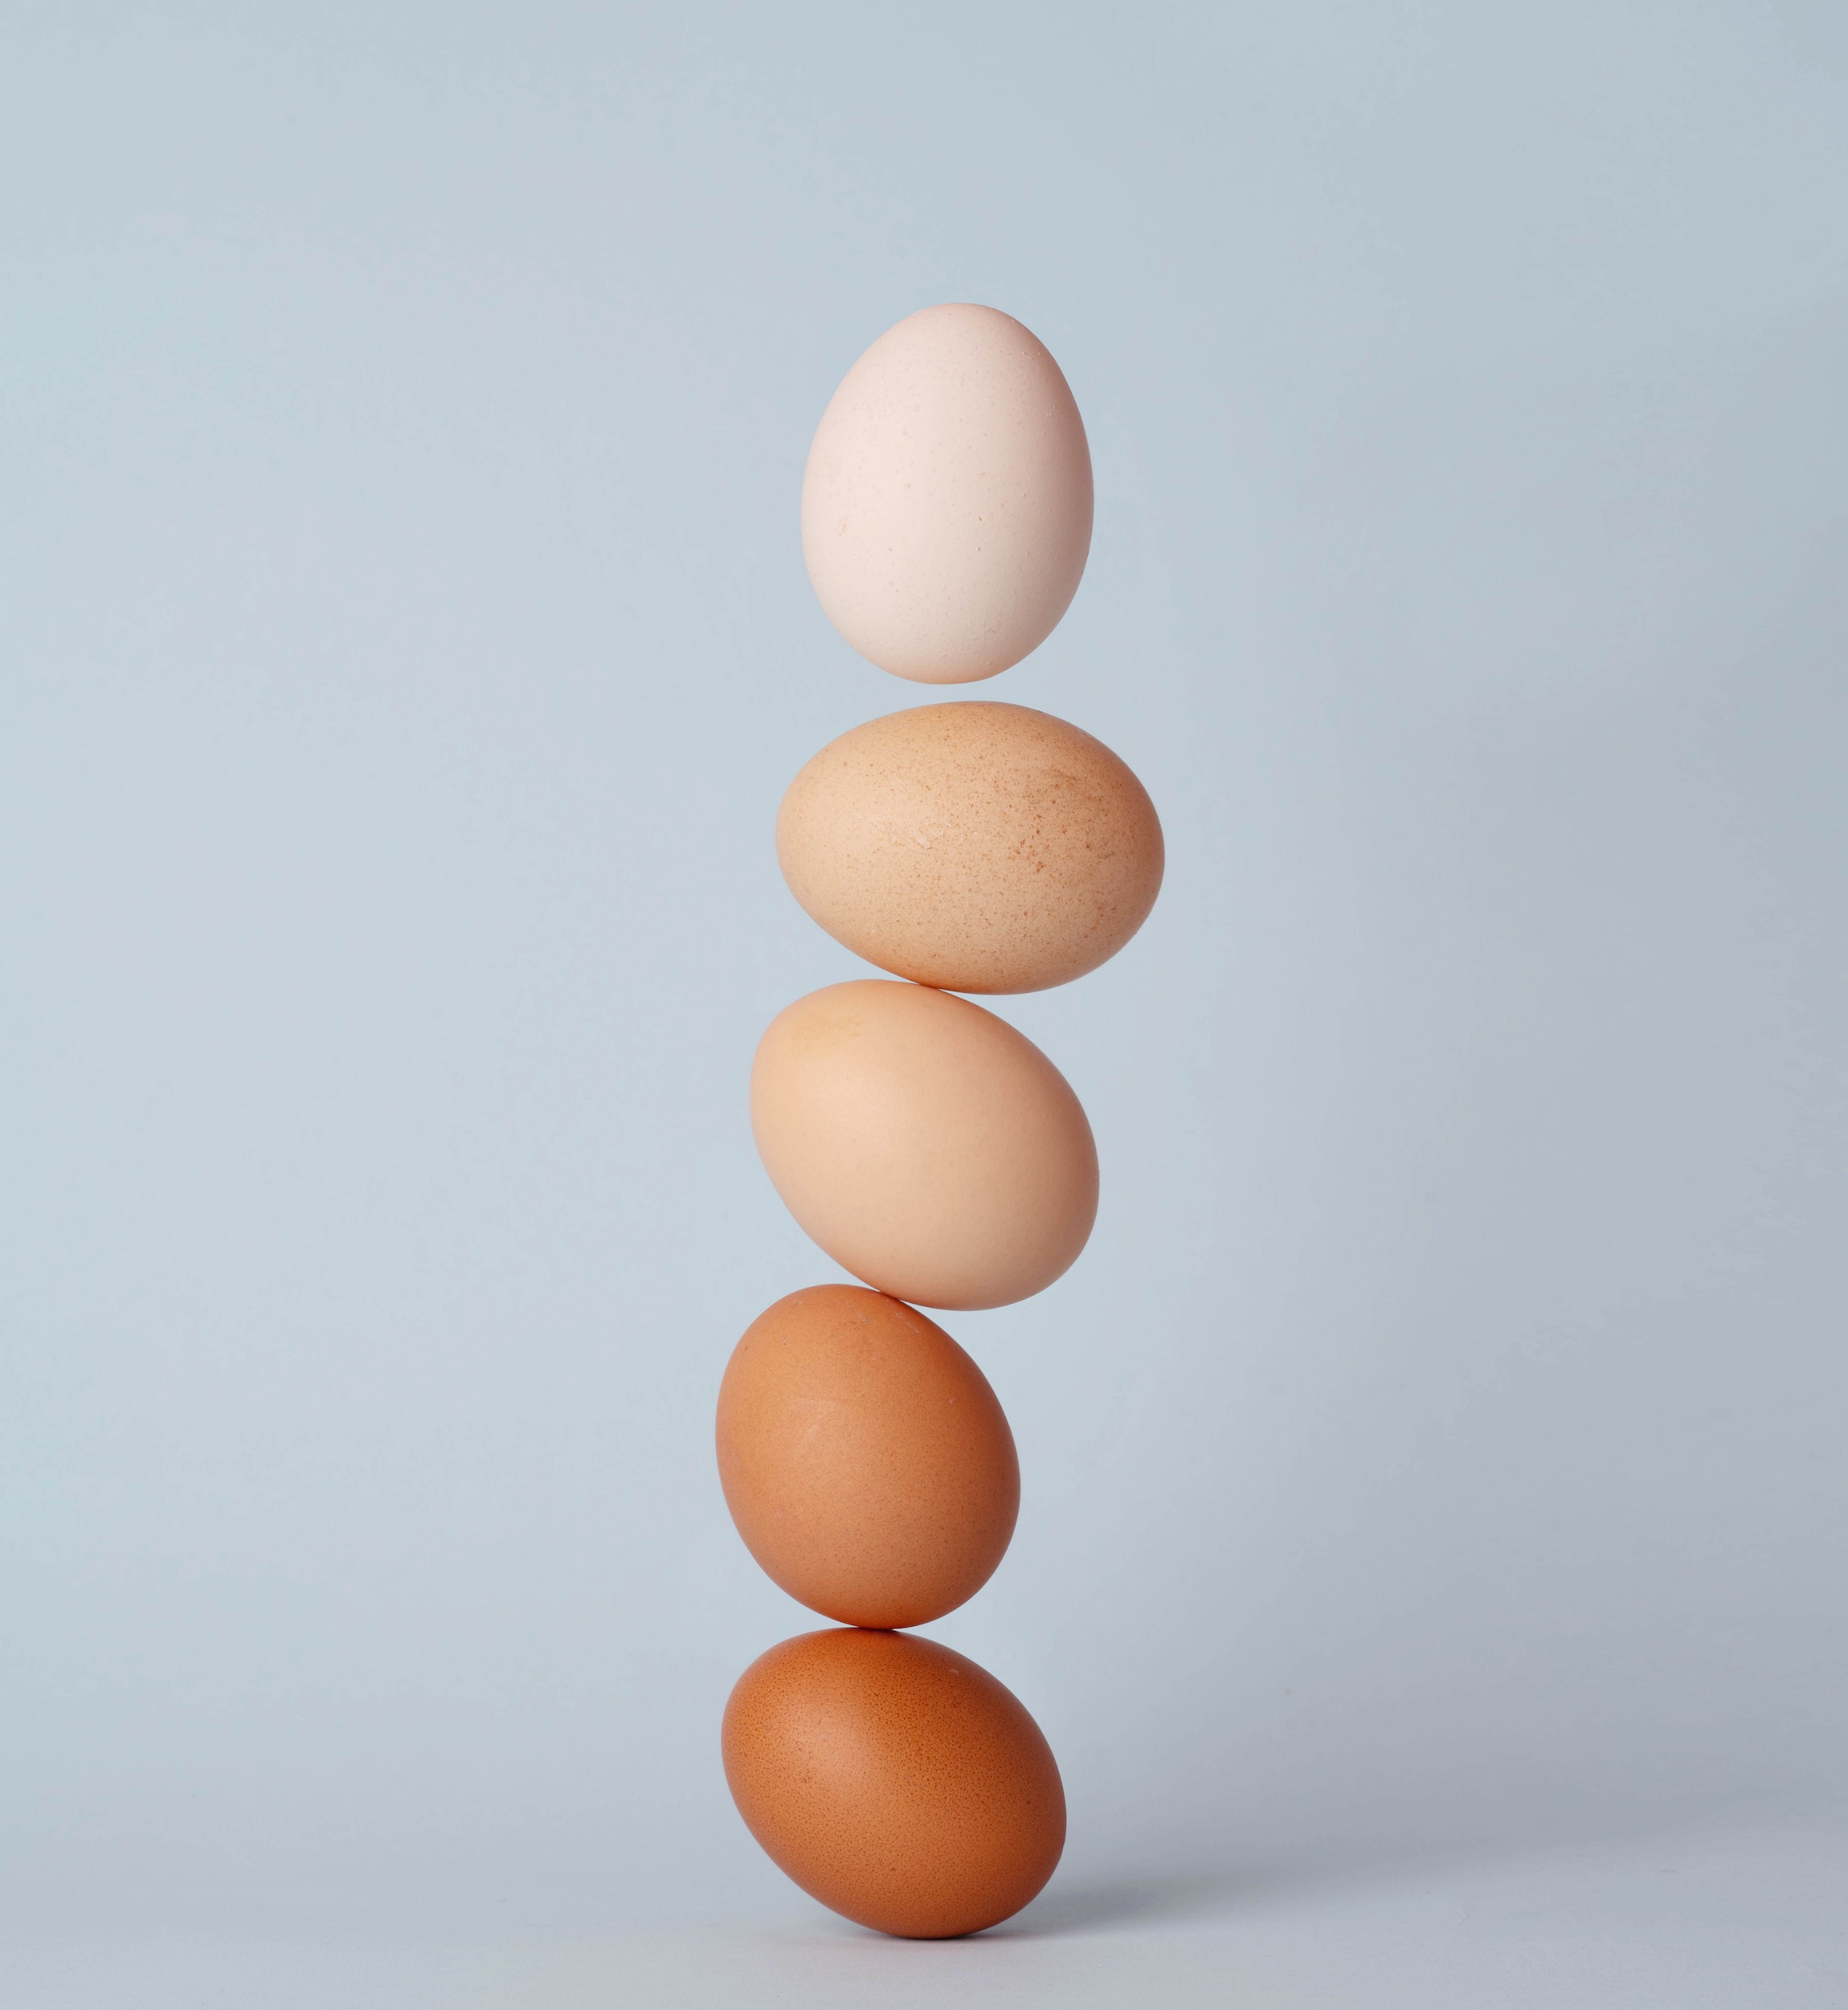 Eggs stacked up